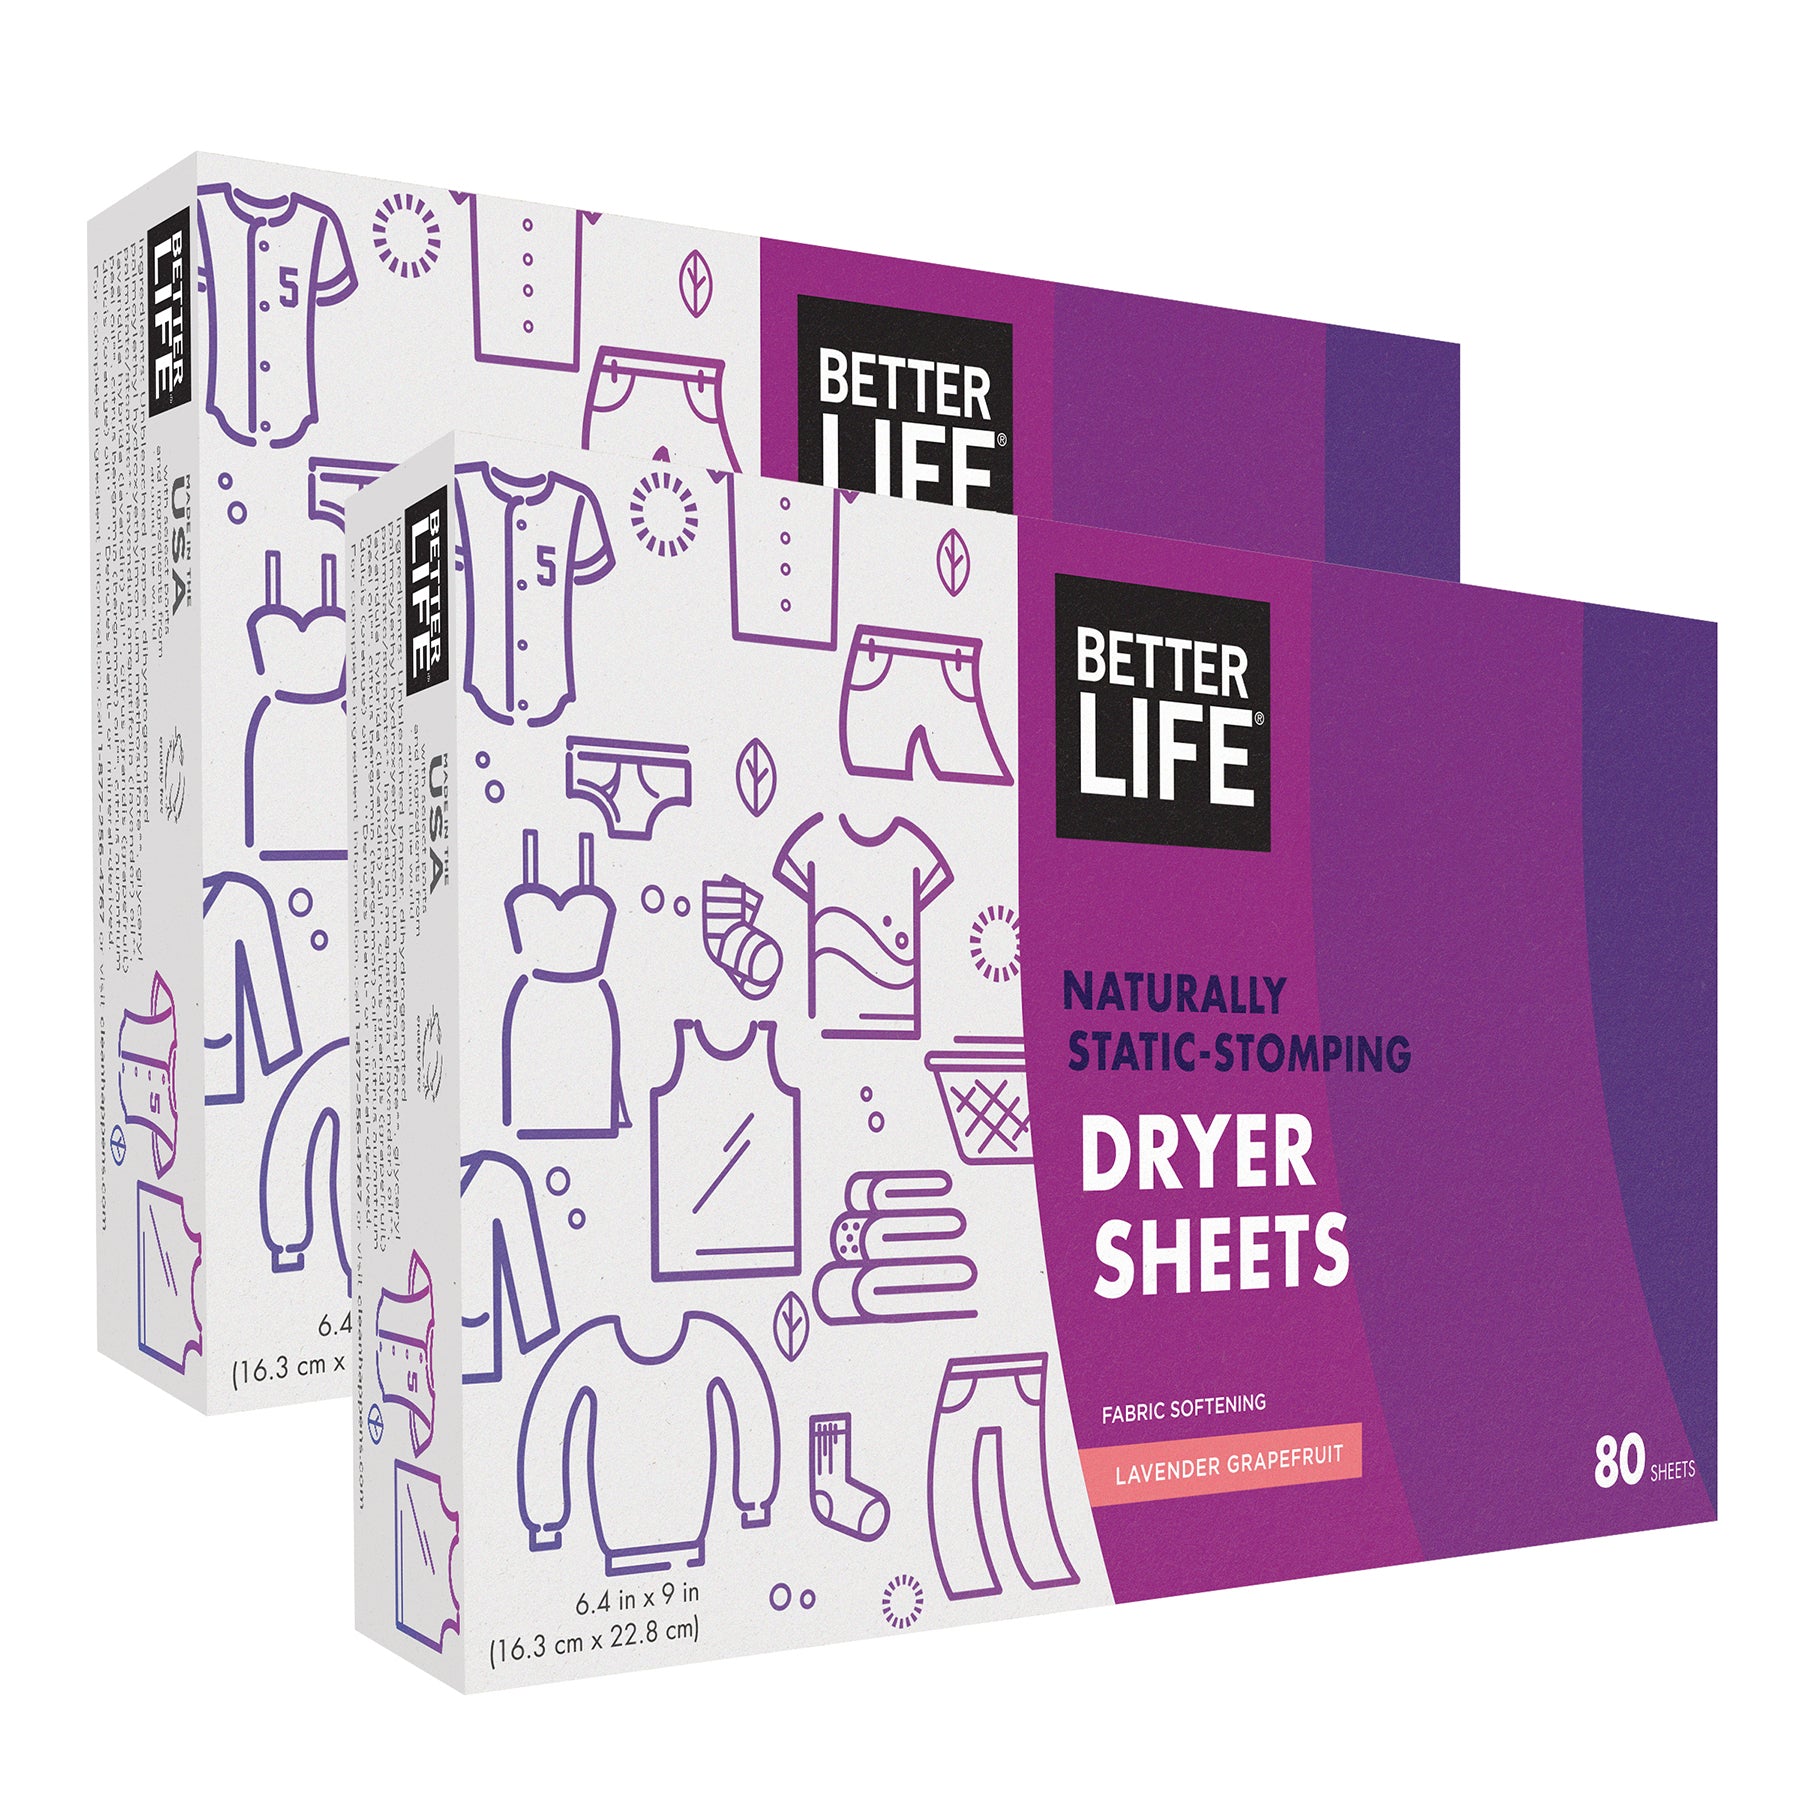 Better Life Dryer Sheets - pack of 2